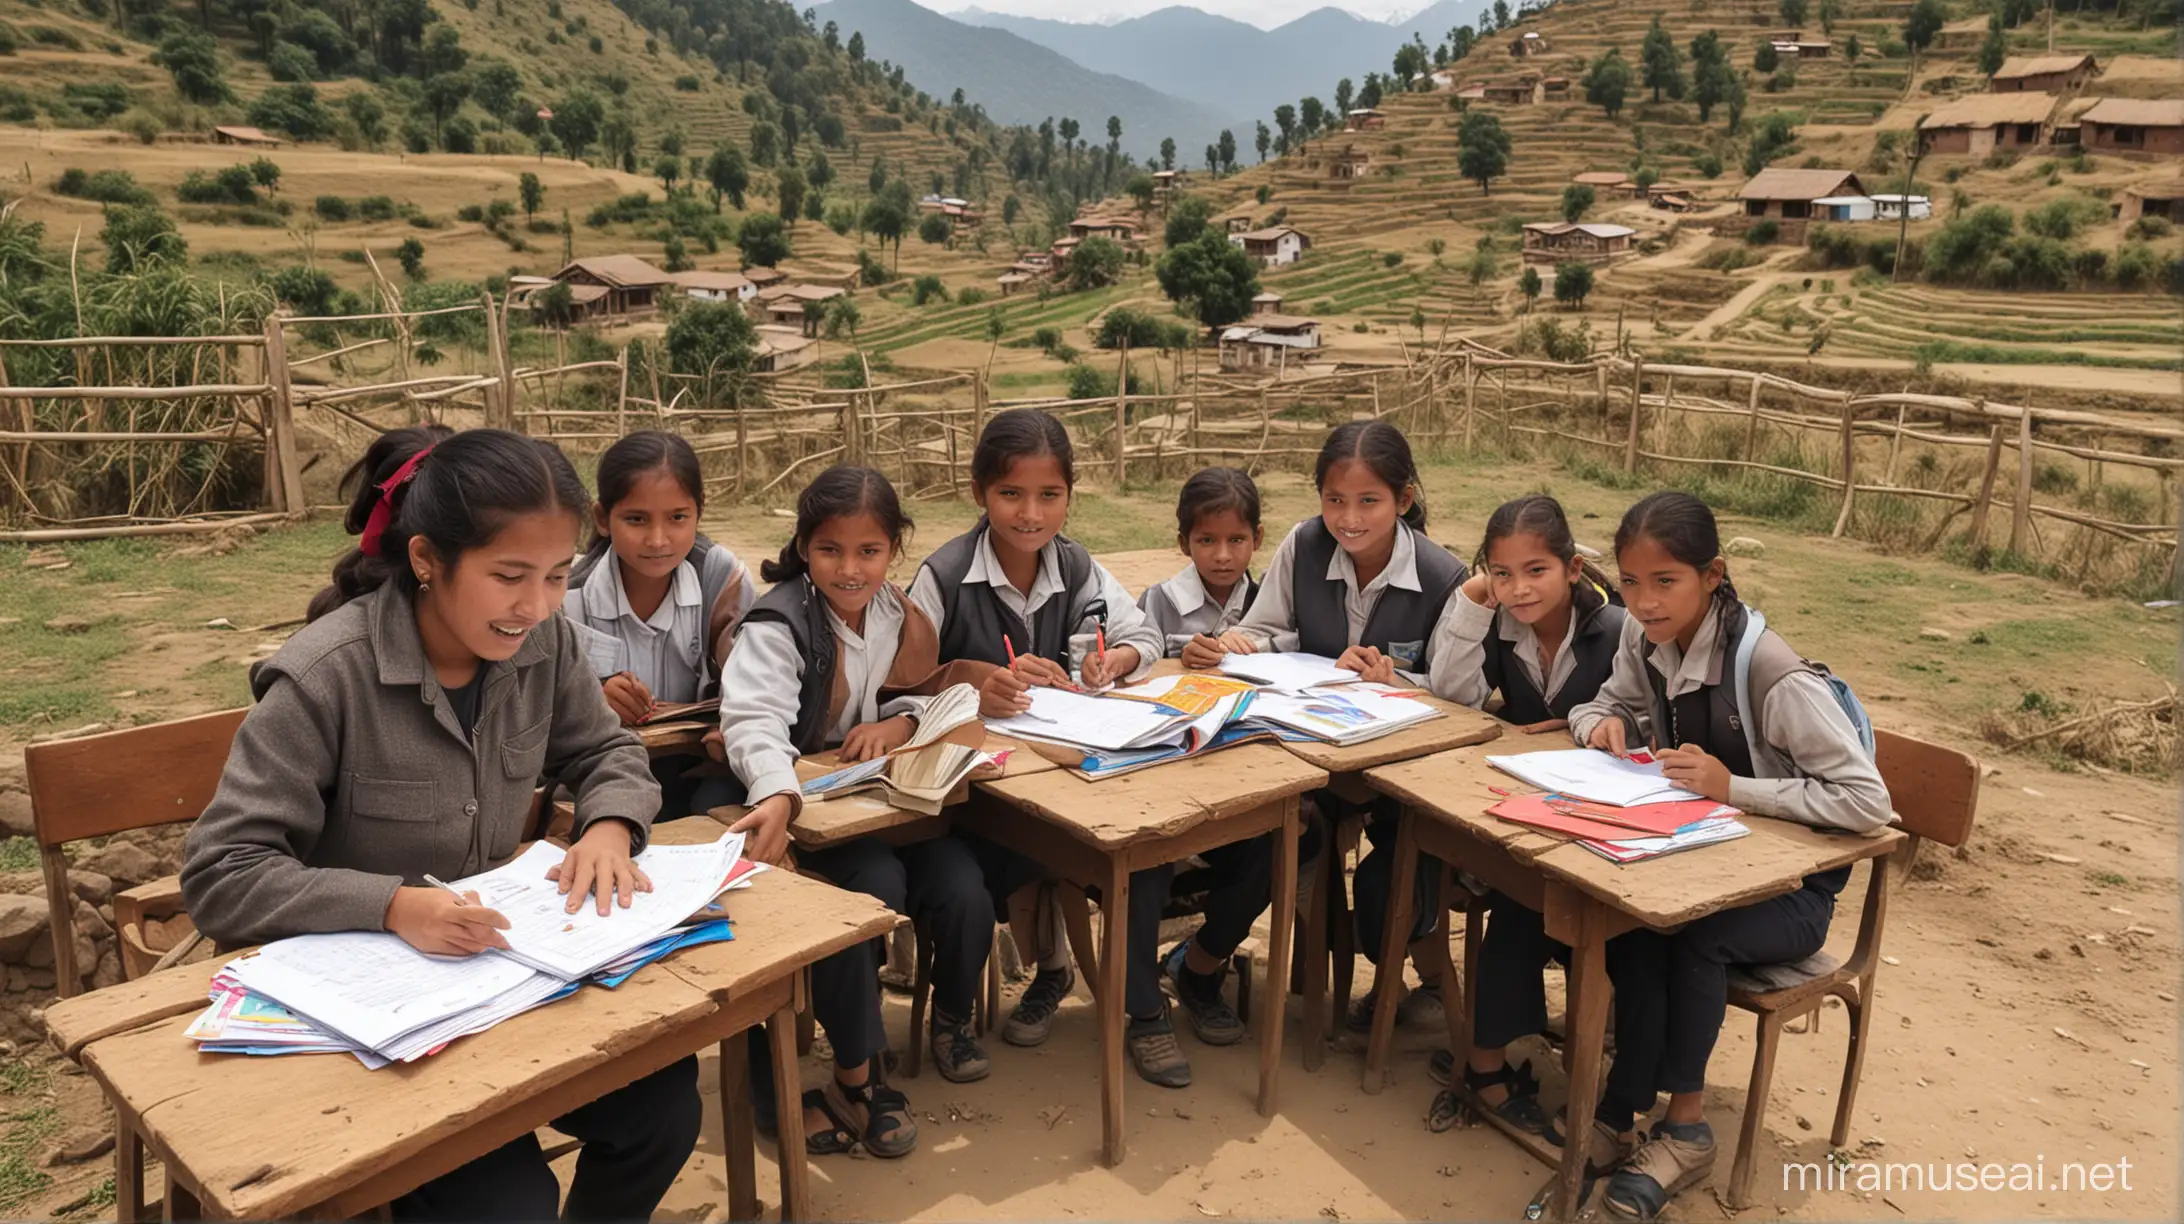 monitoring and evaluation of an education project in rural community in Nepal